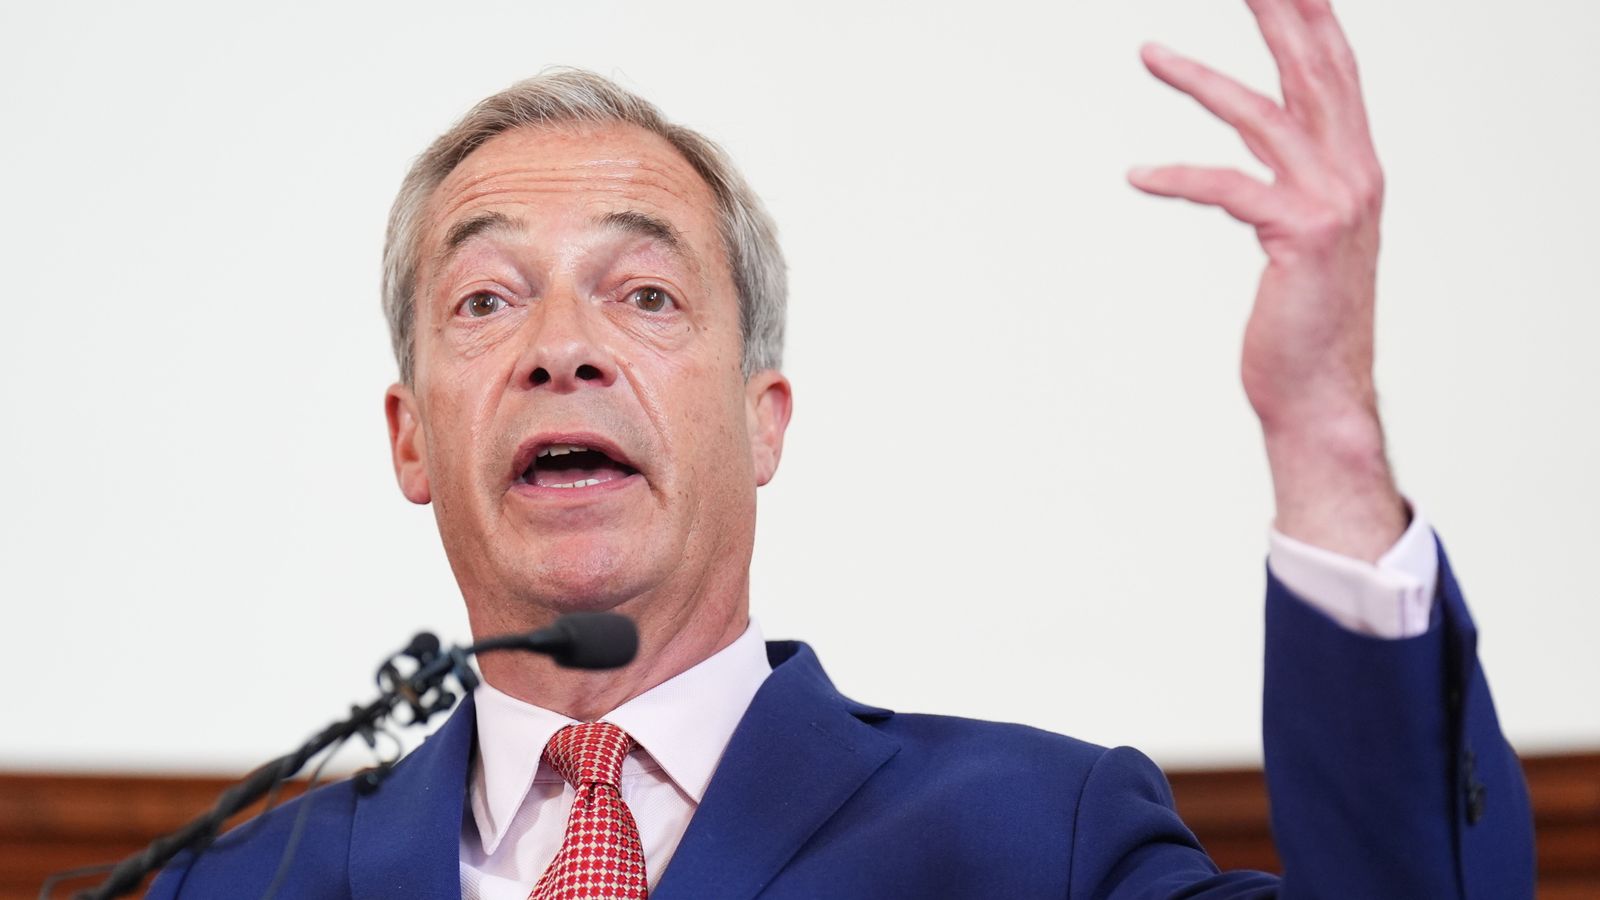 Nigel Farage demands to be involved in leaders' general election event